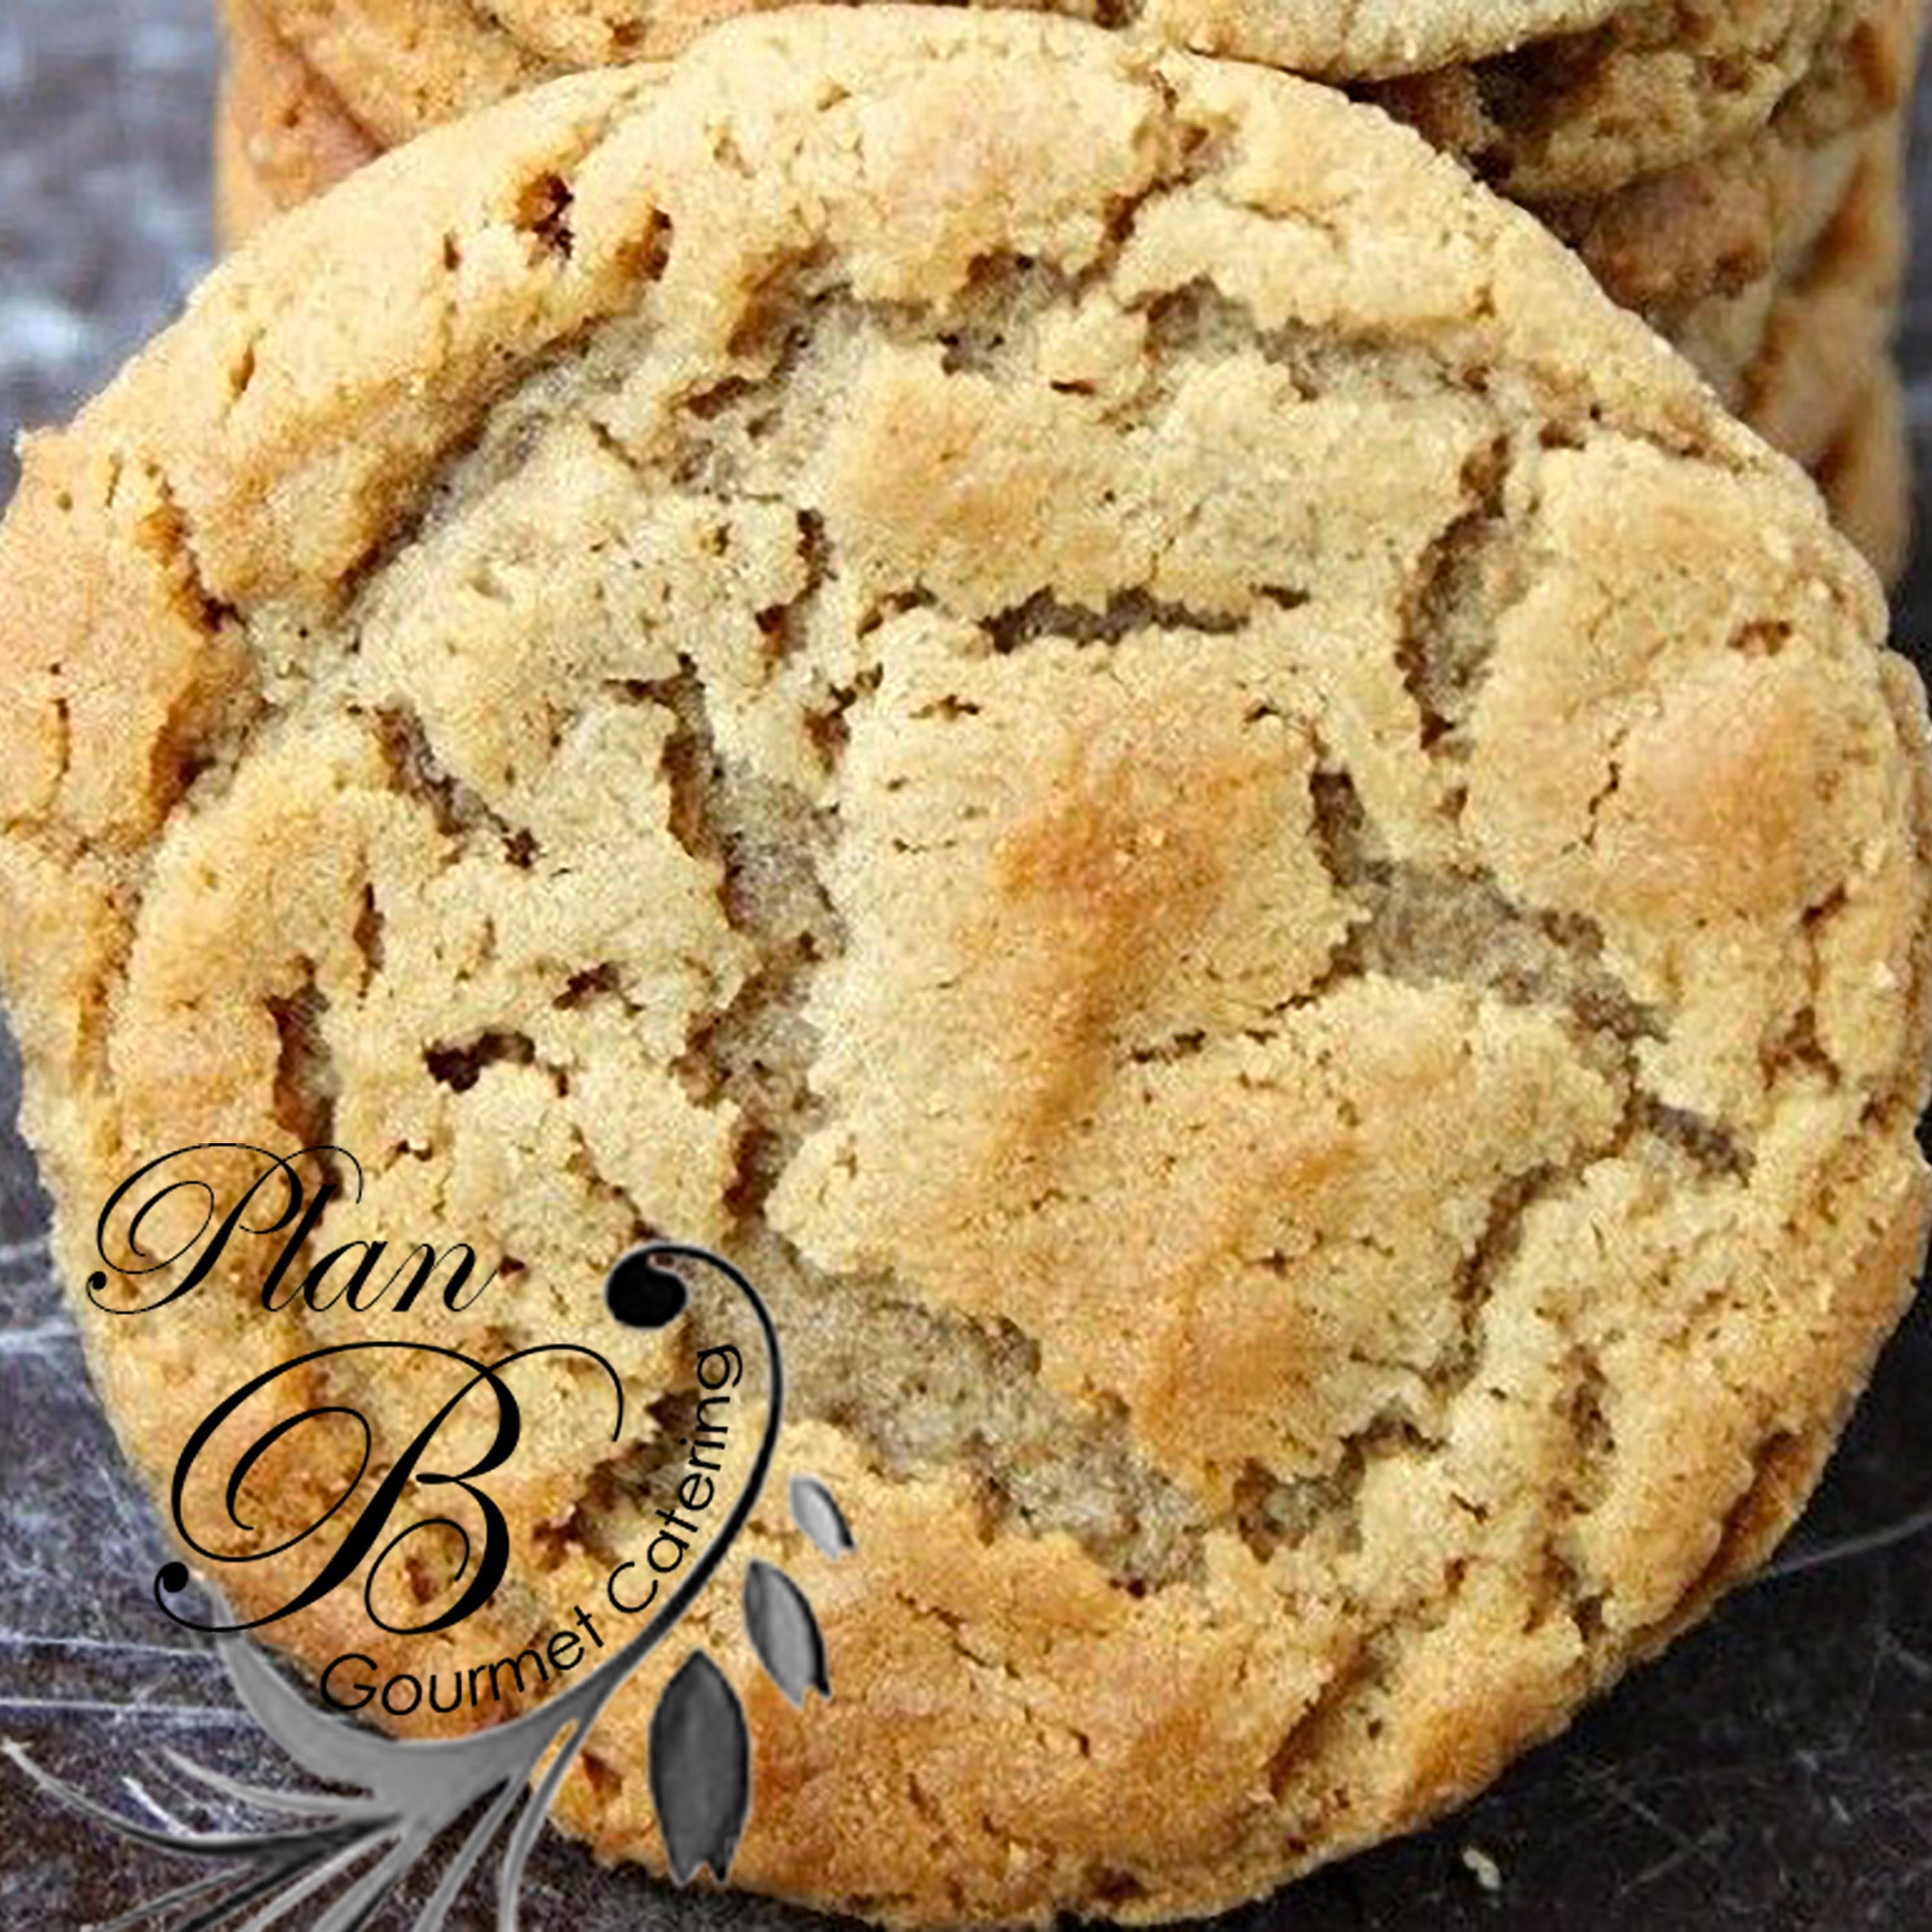 #PlanB #Gourmet meals online by professional #Chef and #Mexican #Cuisine @Canada gourmet foods online best food gifts order gourmet food basket delivery cuisine luxury meals fancy food gifts gourmet food de cuisine specialty gourmet food shipped catering order gourmet food near me online gourmet restaurant taste good professional chef palate good taste website best gourmet food delivery send meal #Peanut Butter Cookies